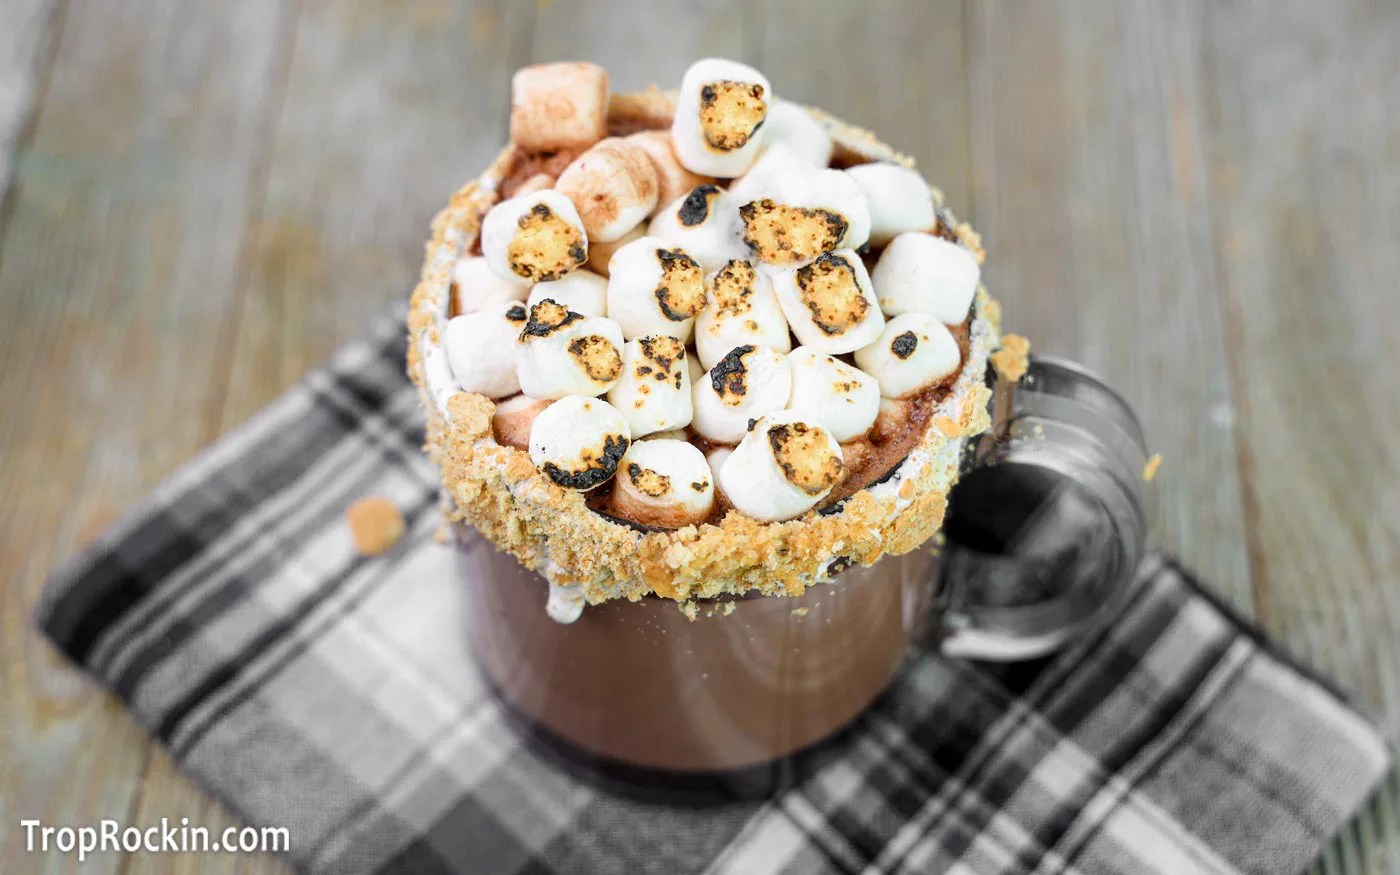 Mug of S'mores Hot Chocolate topped with toasted marshmallows.